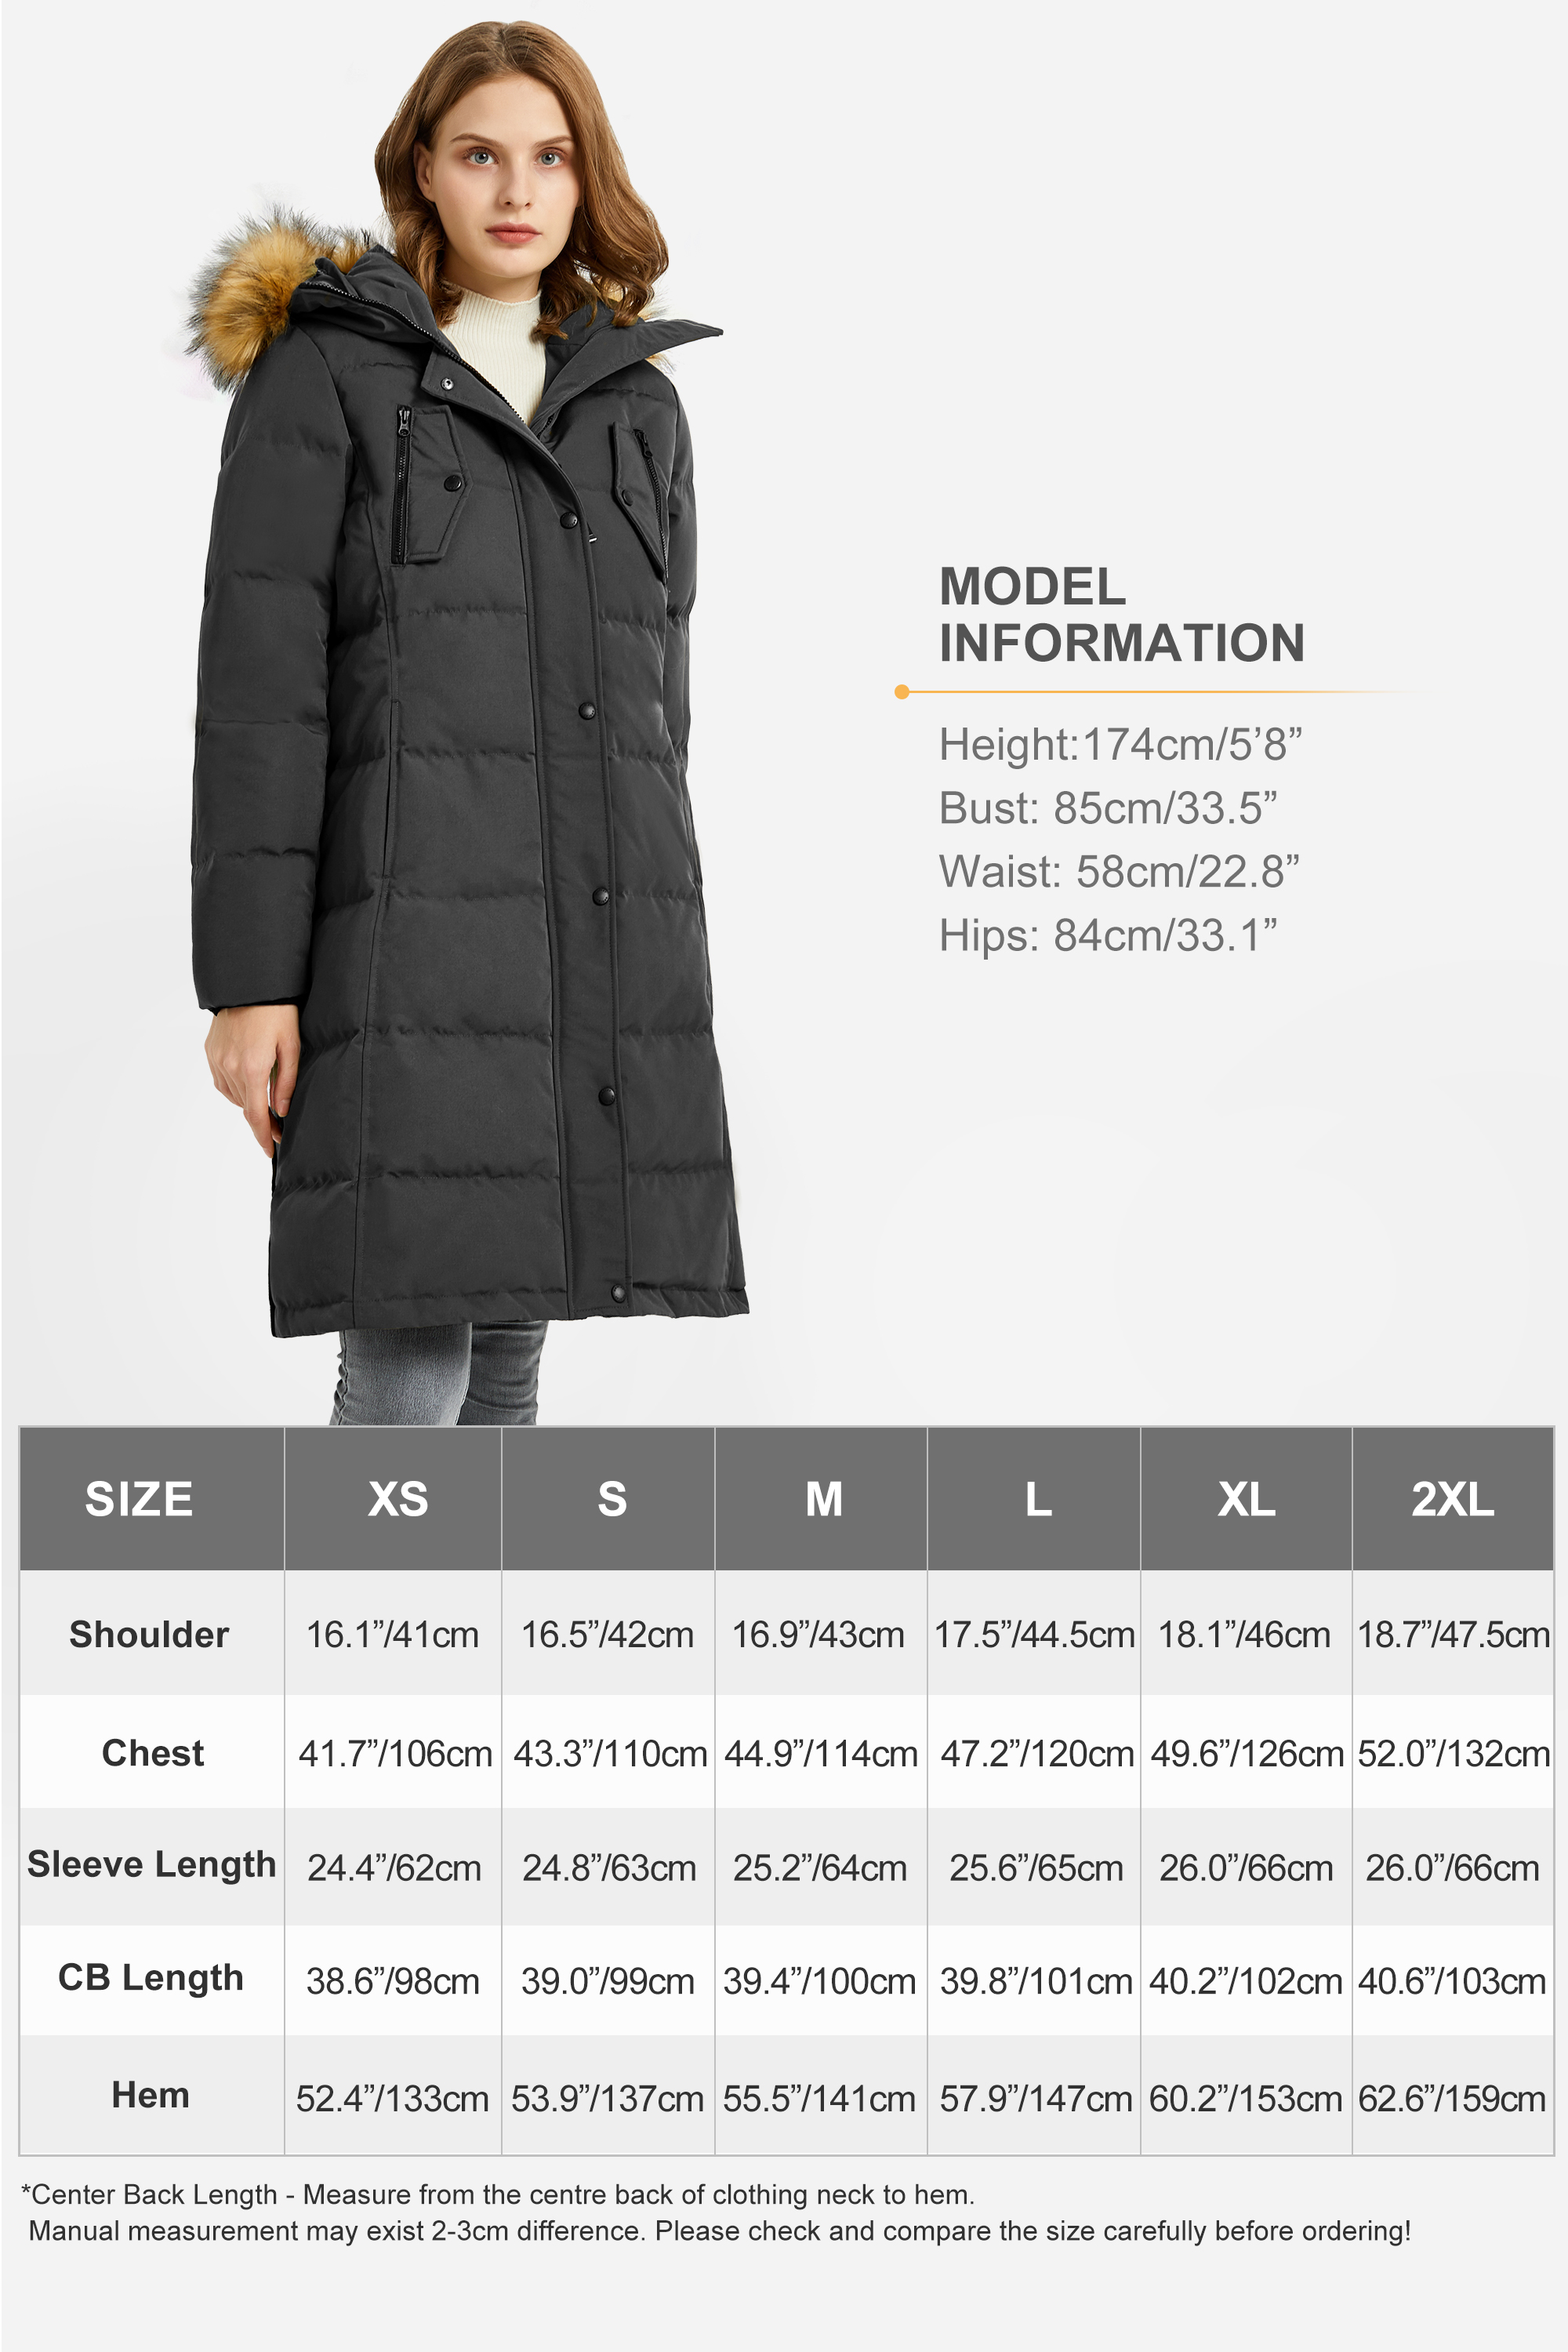 Orolay Women's Down Jacket Winter Long Coat Windproof Puffer Jacket with Fur Hood - image 5 of 5